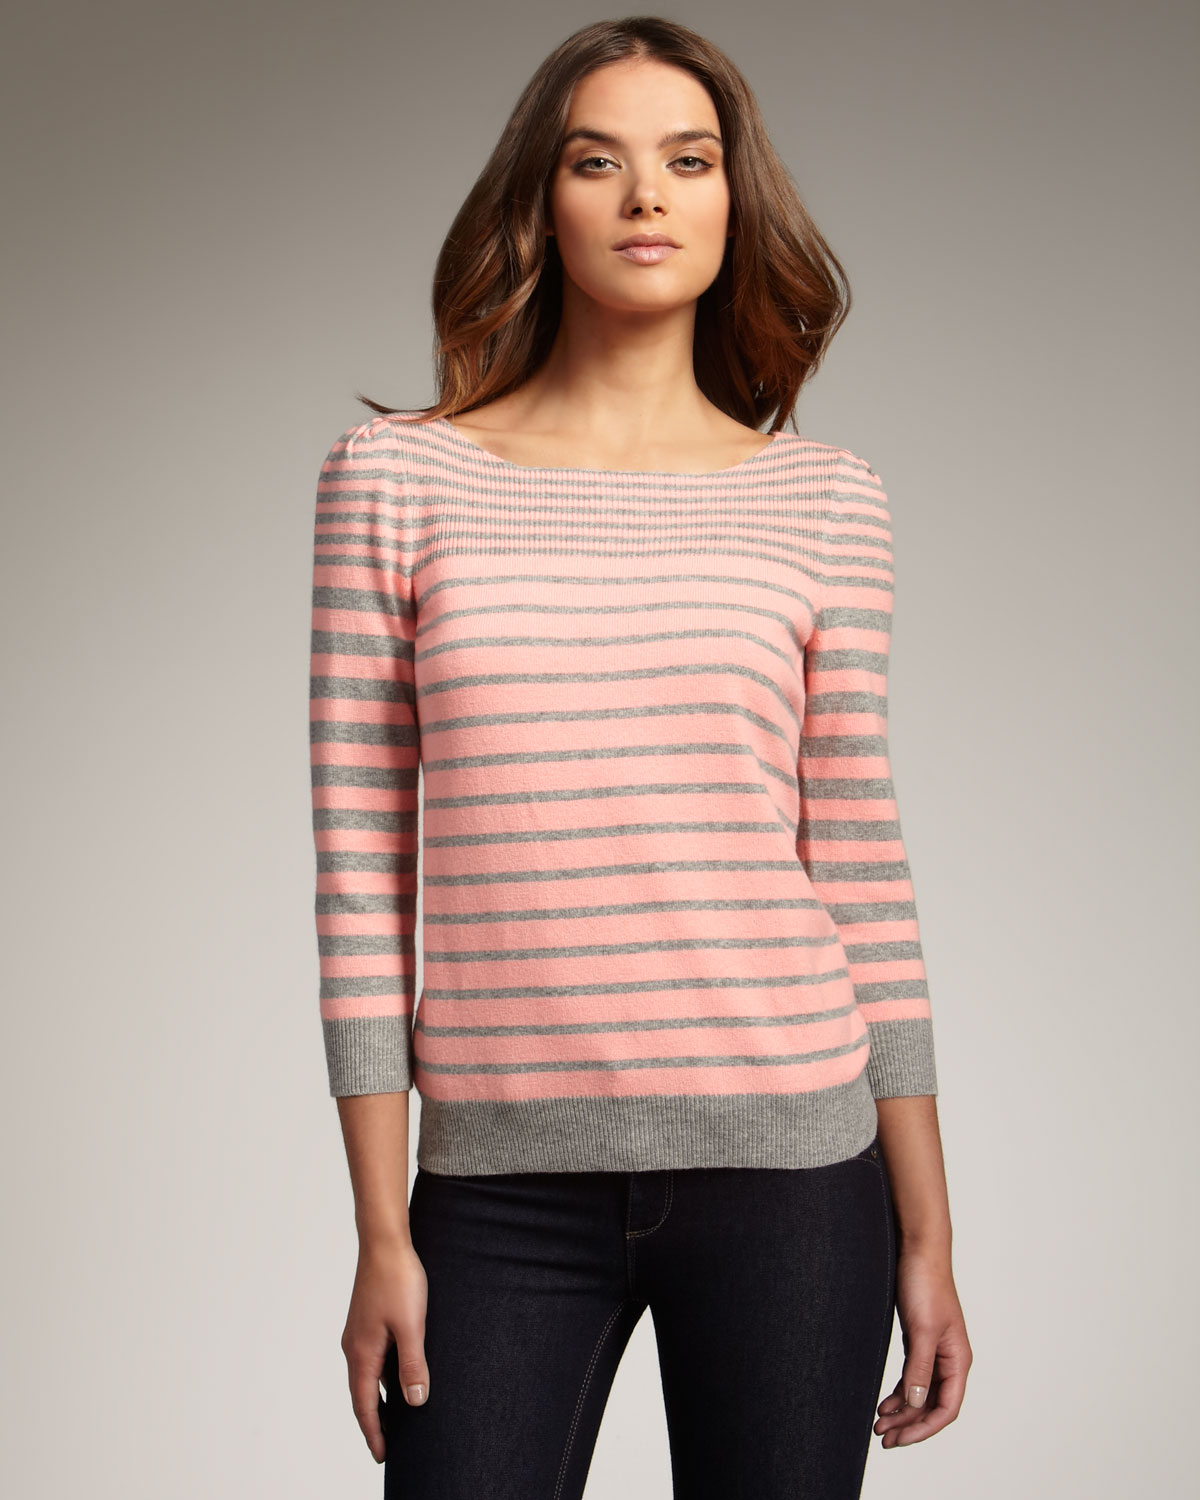 Lyst - Rebecca Taylor Striped Sweater in Pink